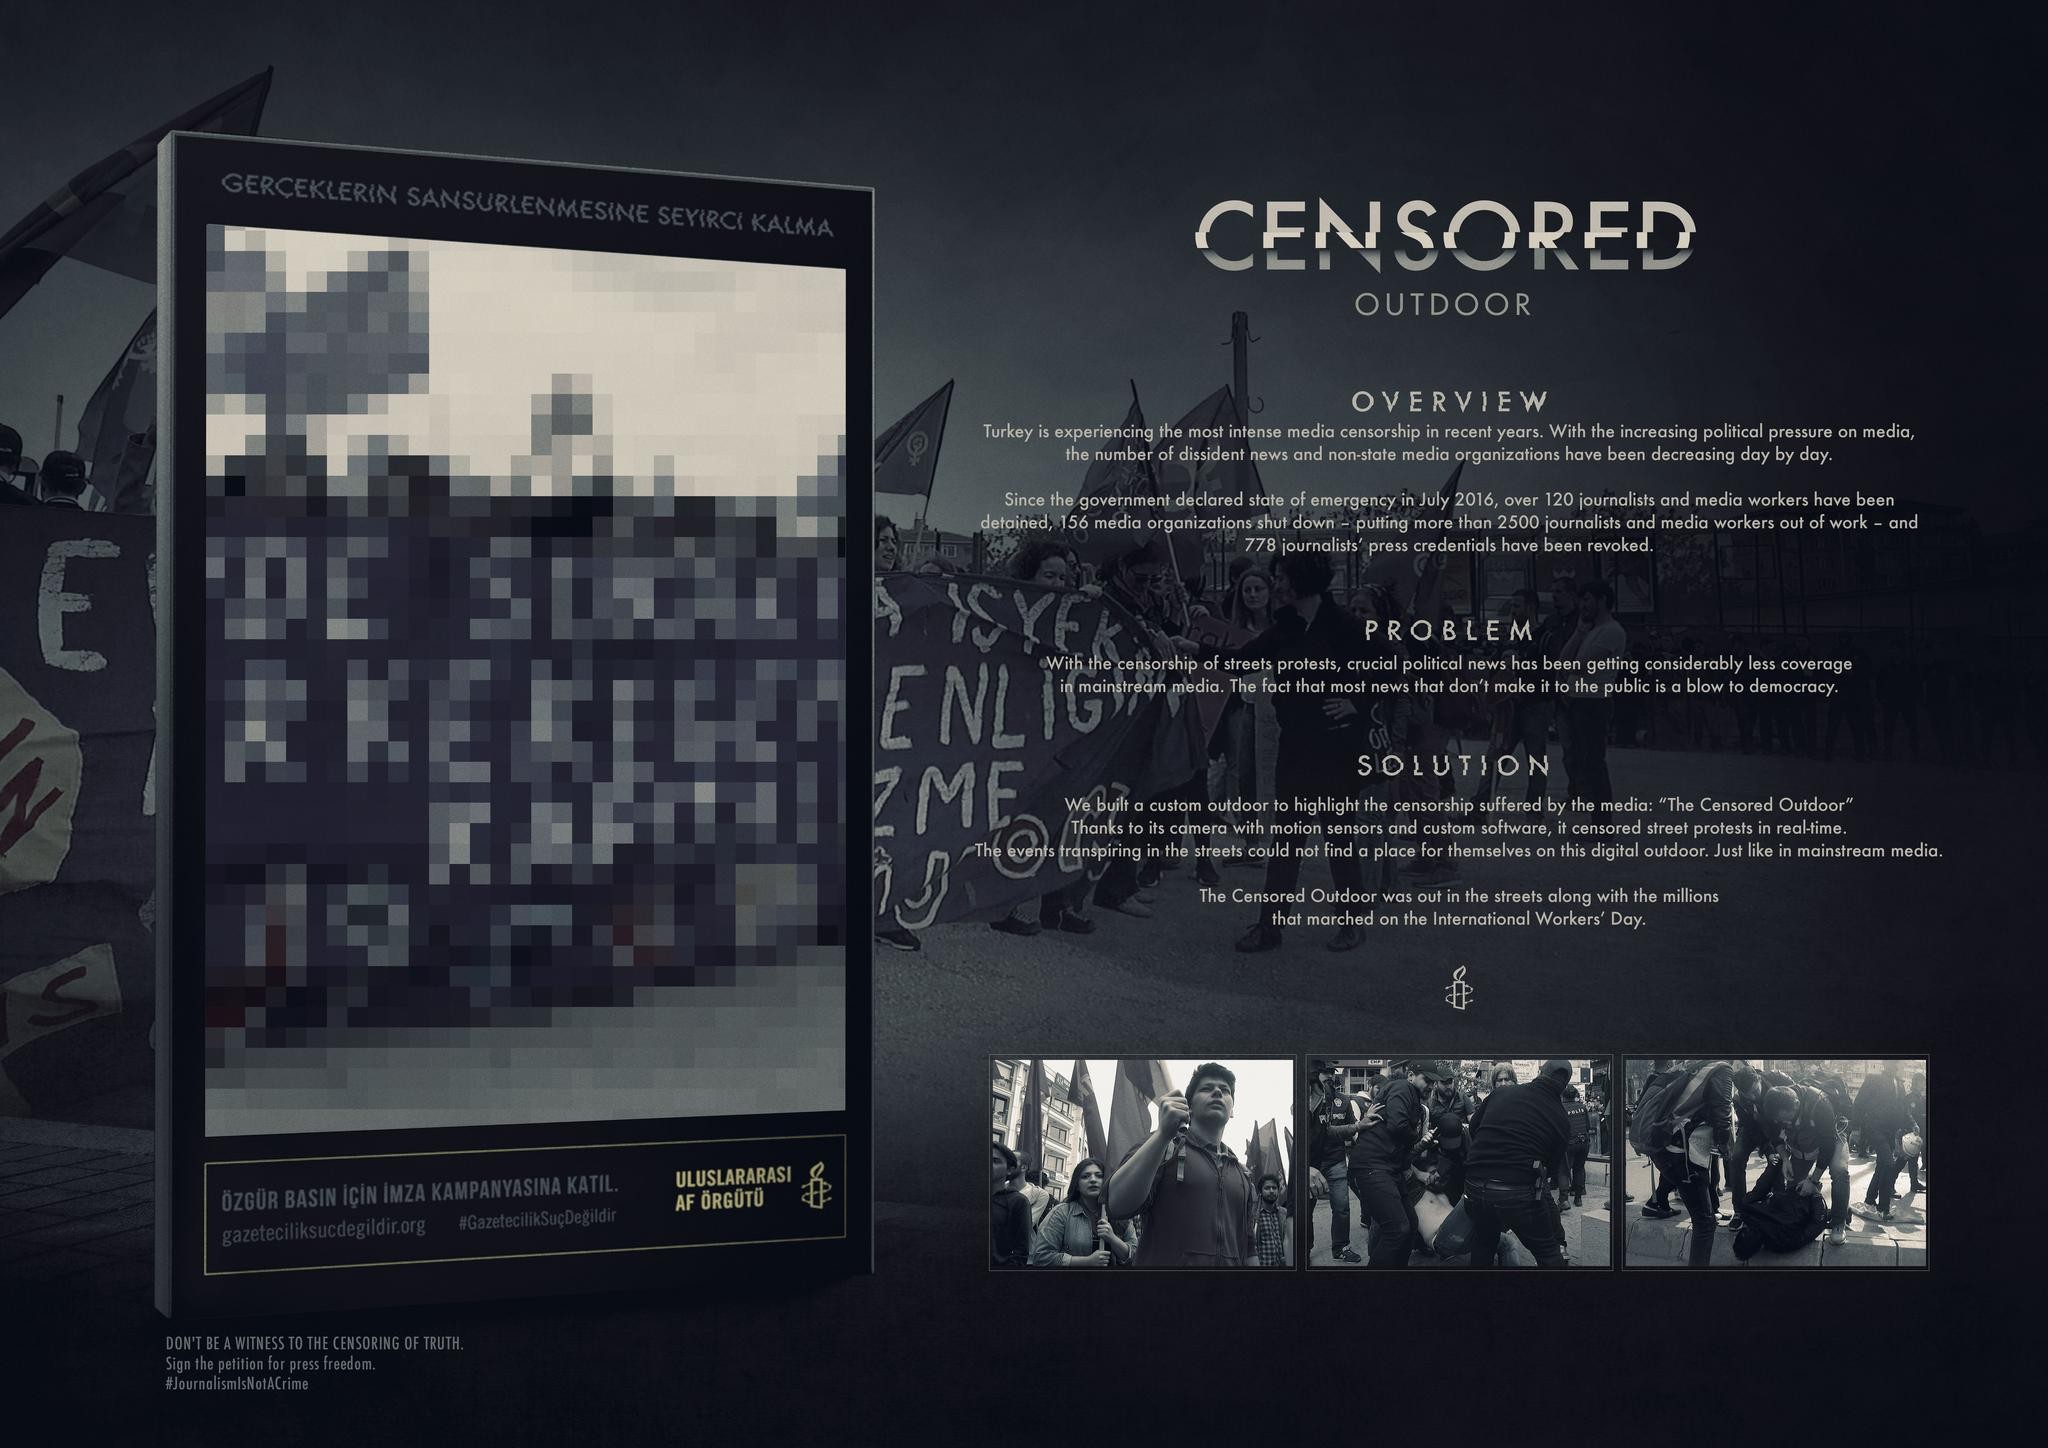 CENSORED OUTDOOR